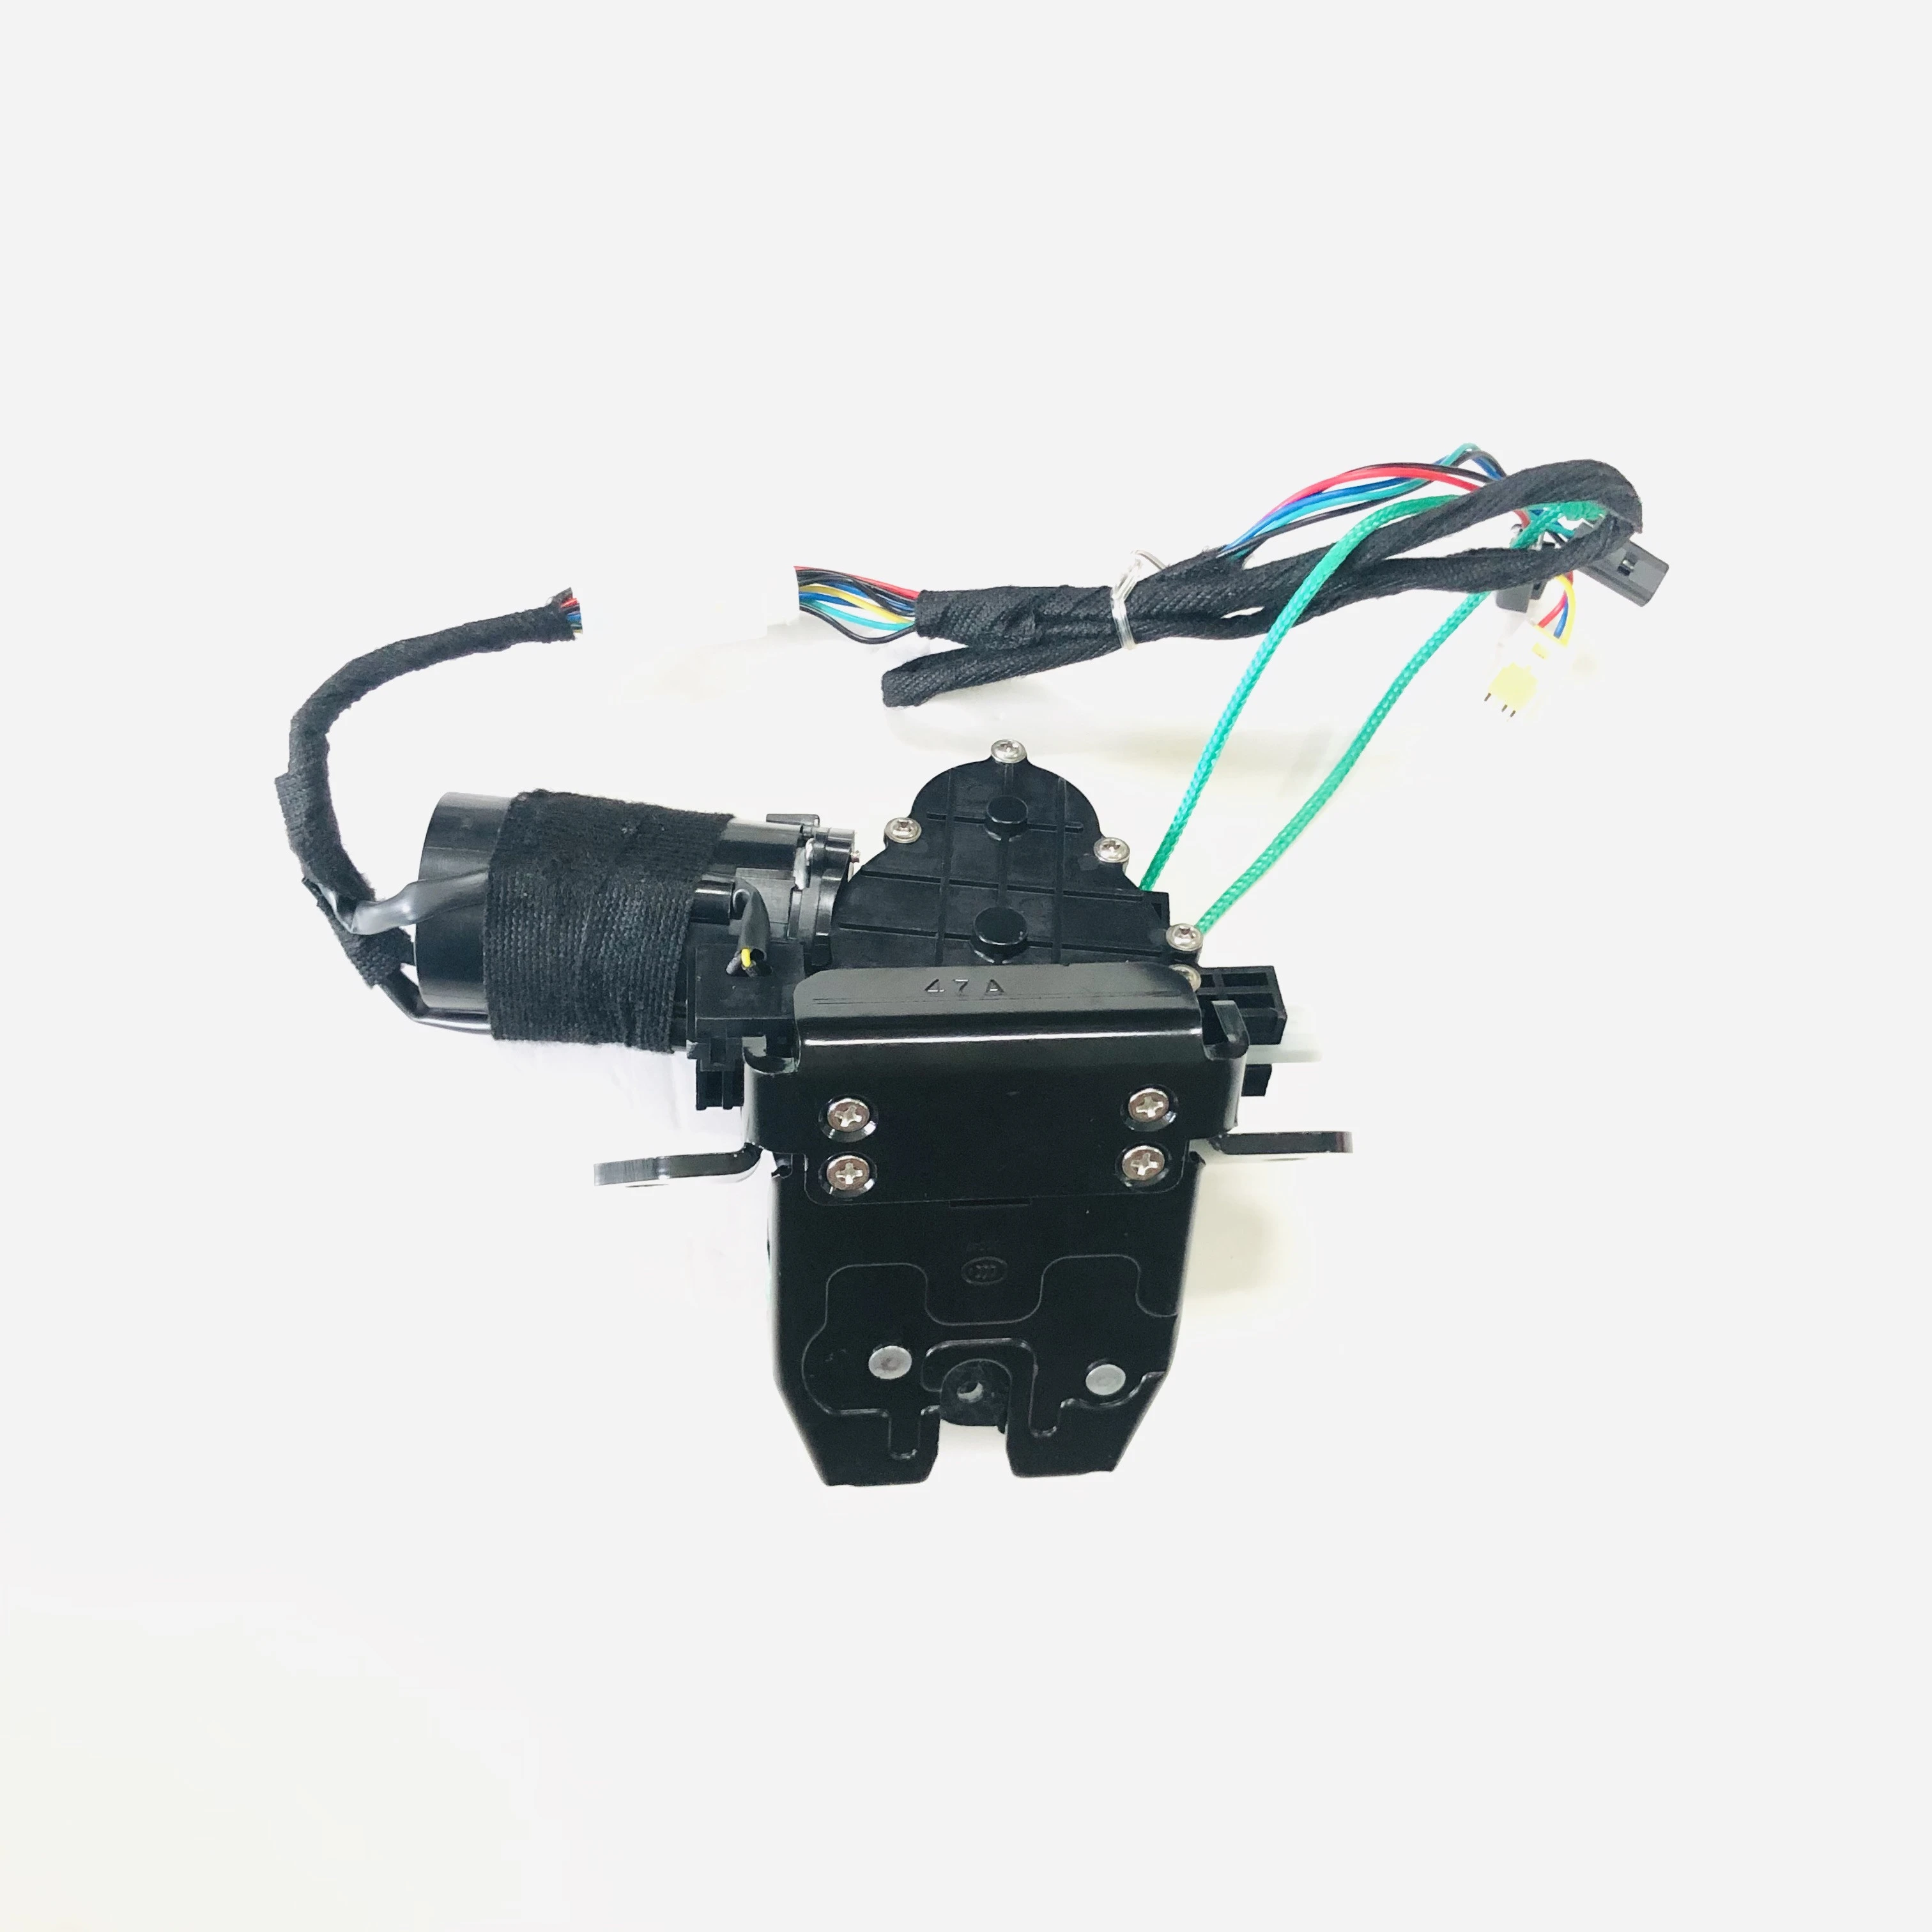 automotive lifter electronic tailgate system for kia NIRO+